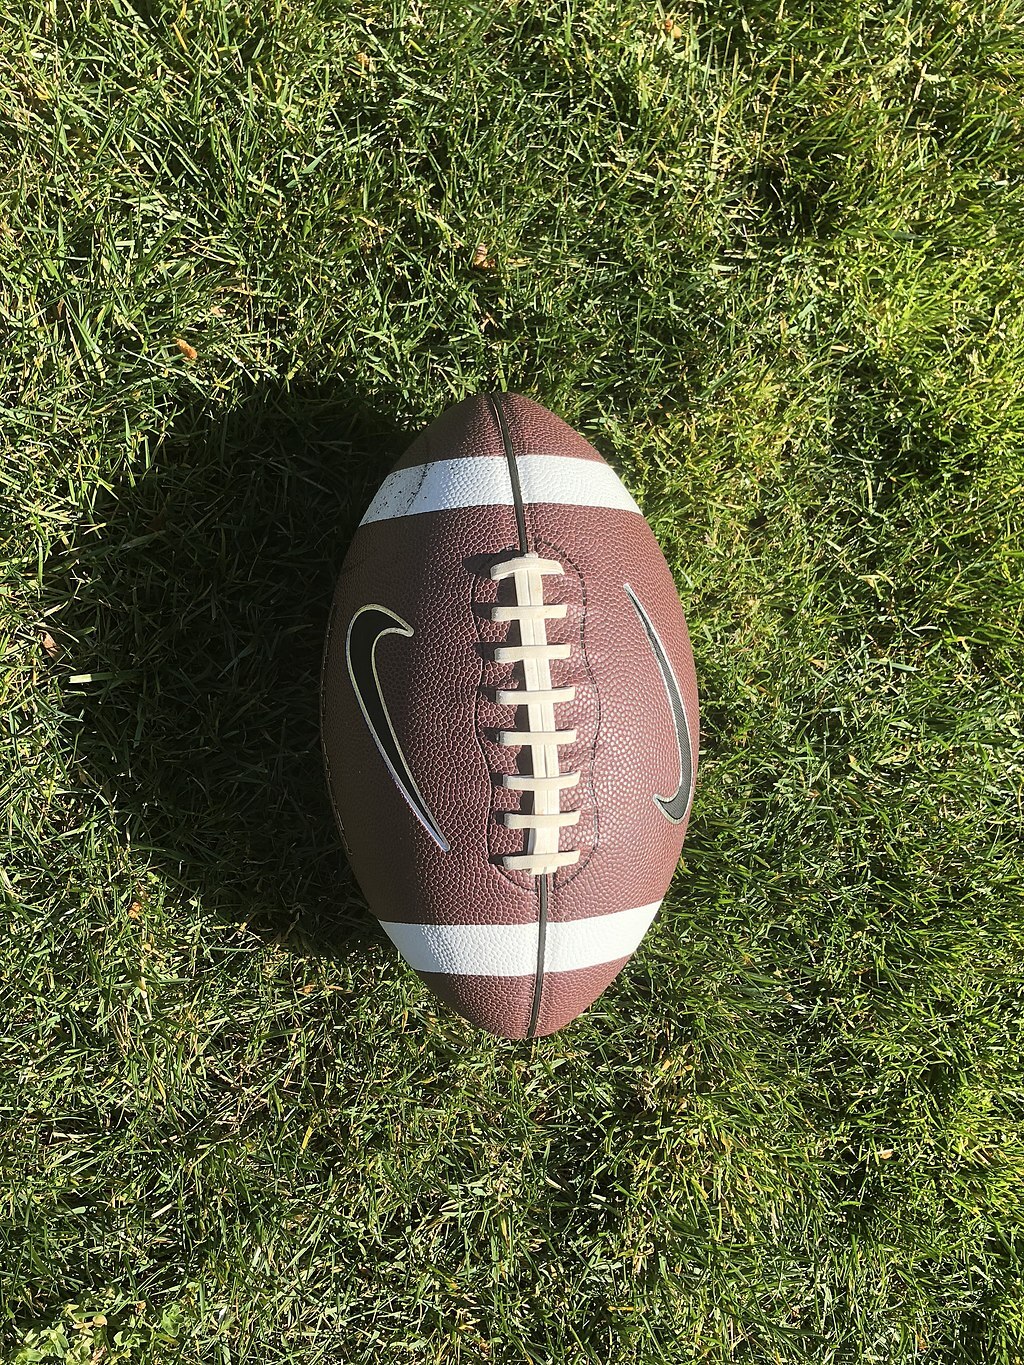 A photo of a football on the ground.